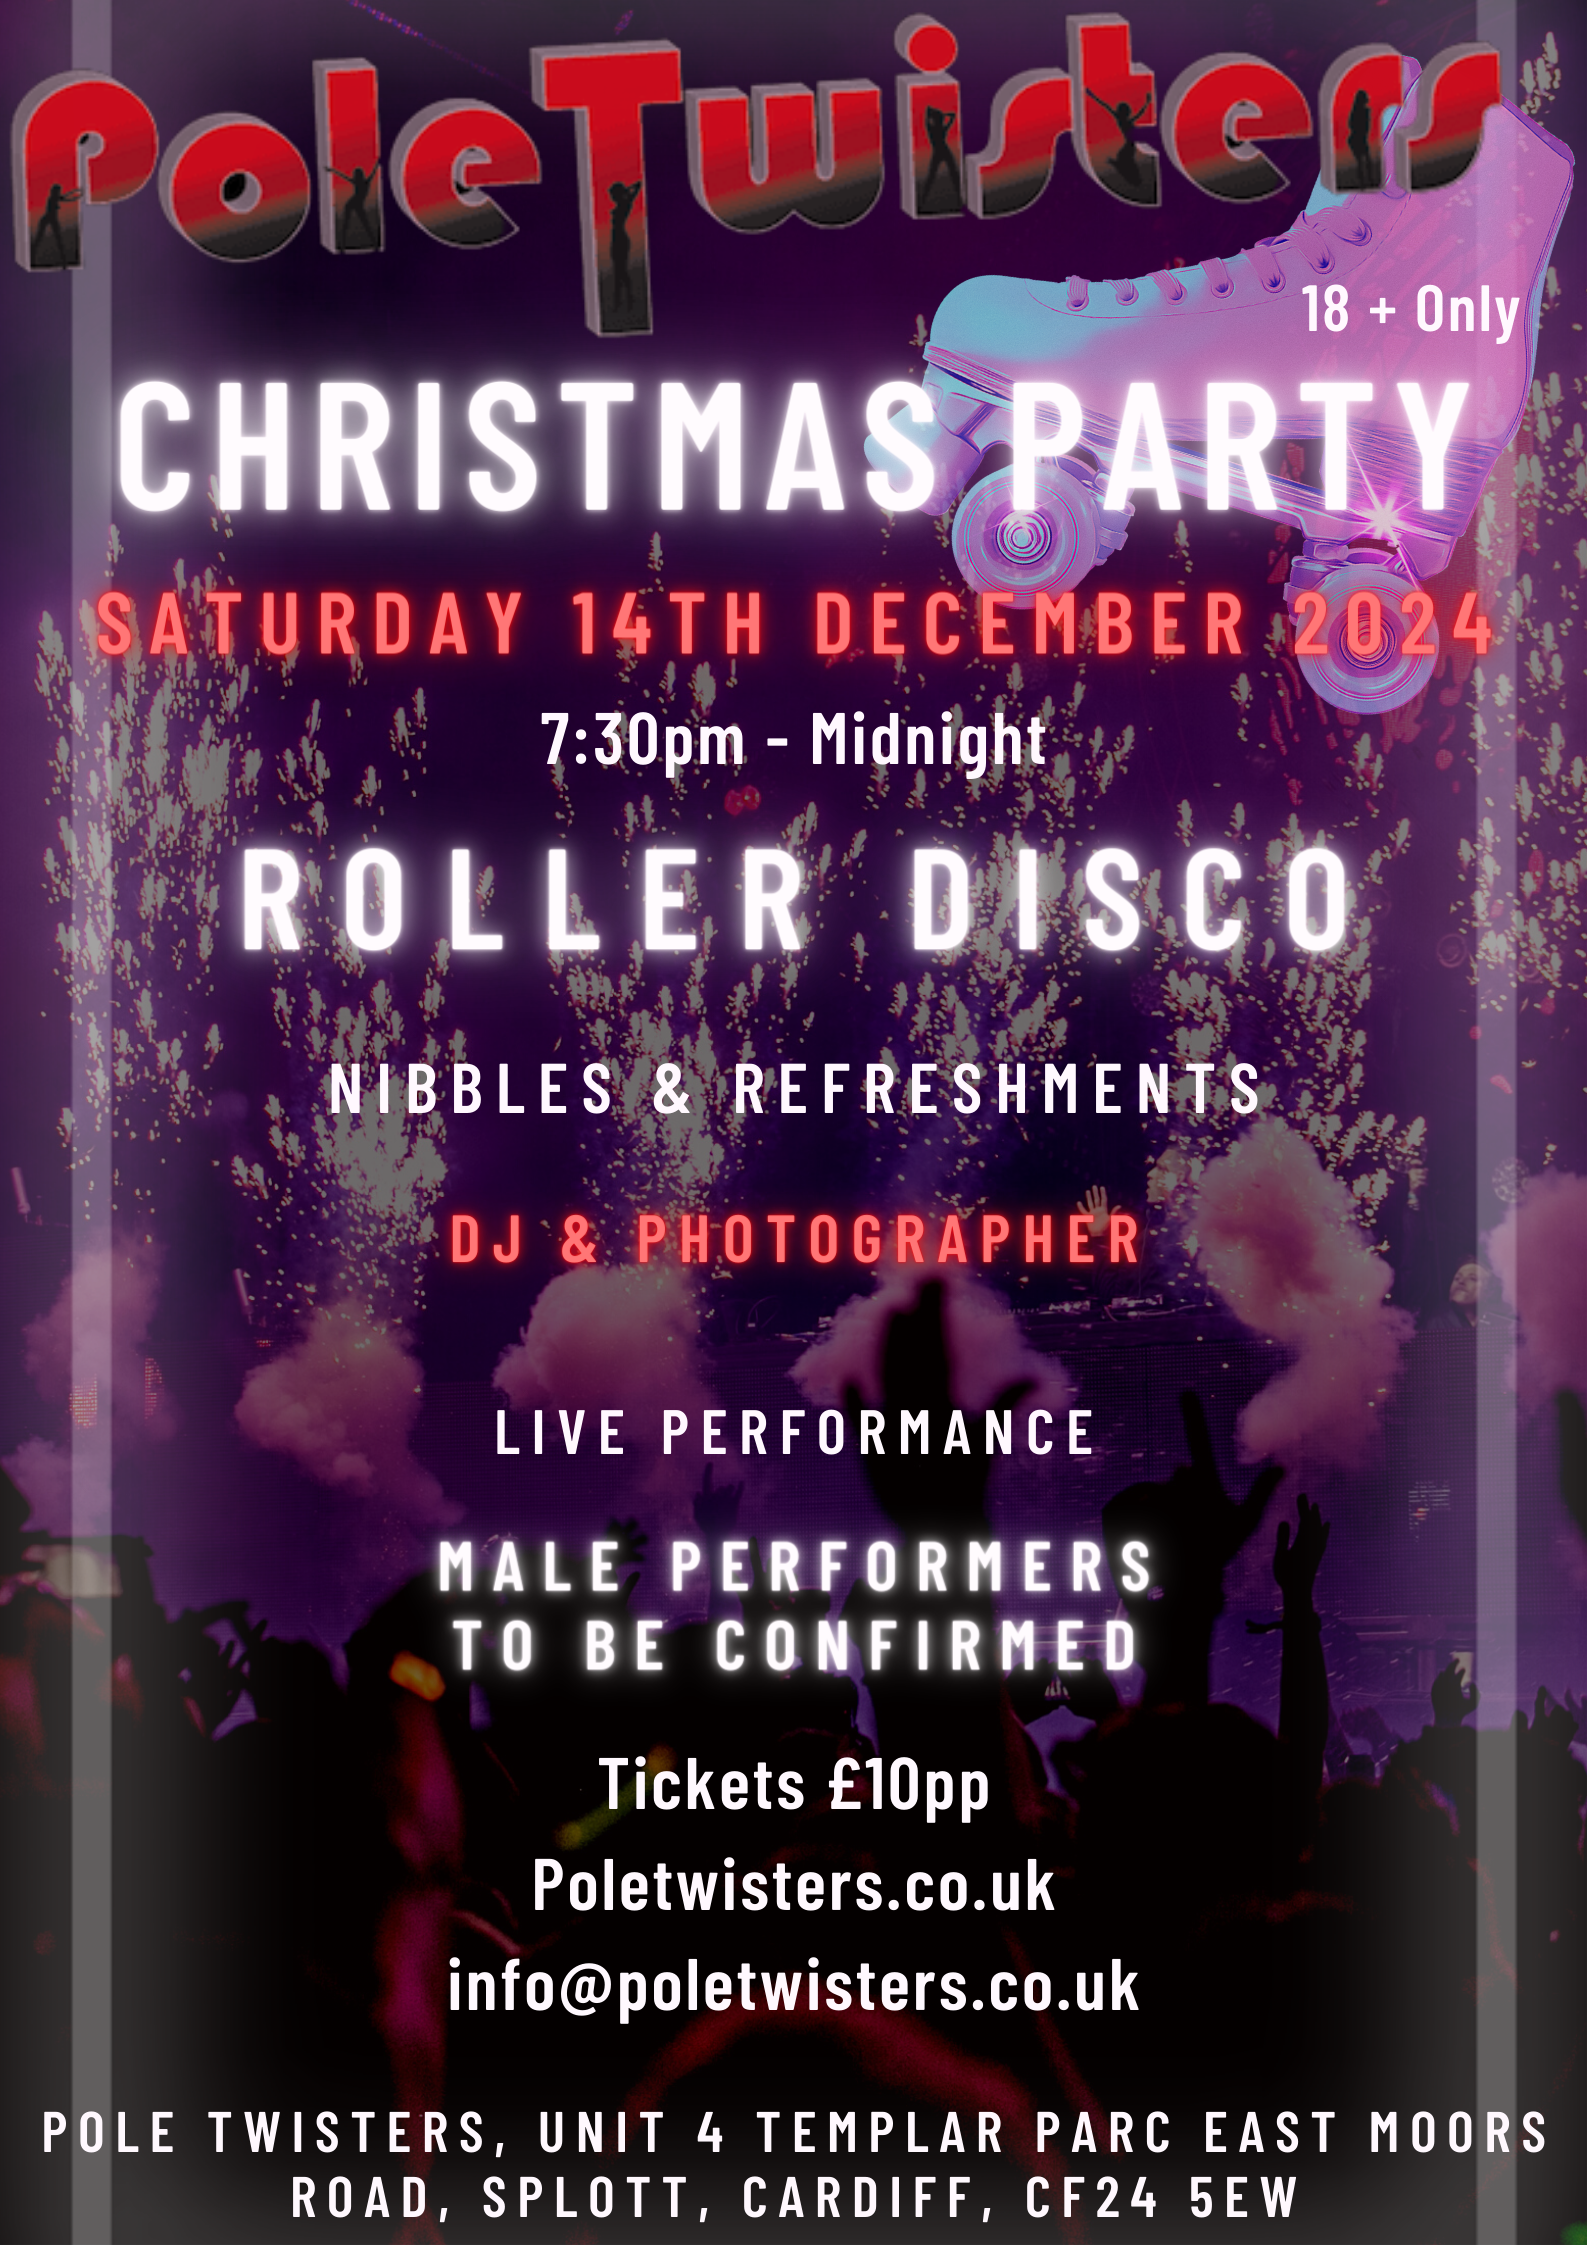 Pole Twisters Christmas Party 2023 in Cardiff with roller disco and male strippers